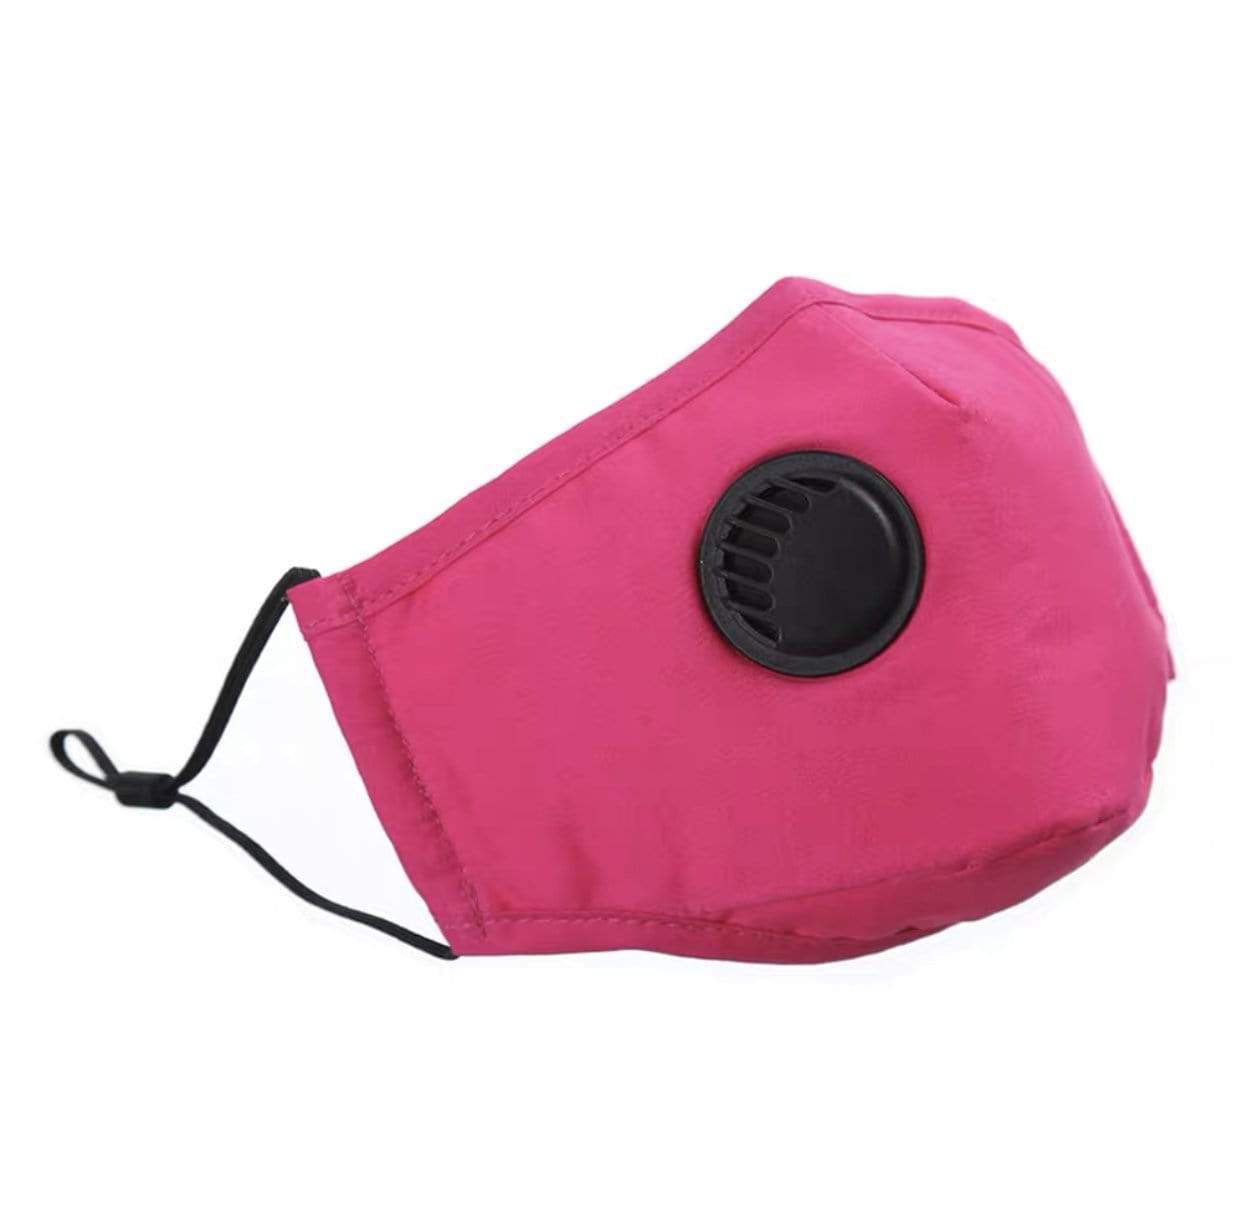 Helms Store Masks Pink Plain Reusable & Adjustable Adults Face Mask with filter pocket and valve (3 Colours)